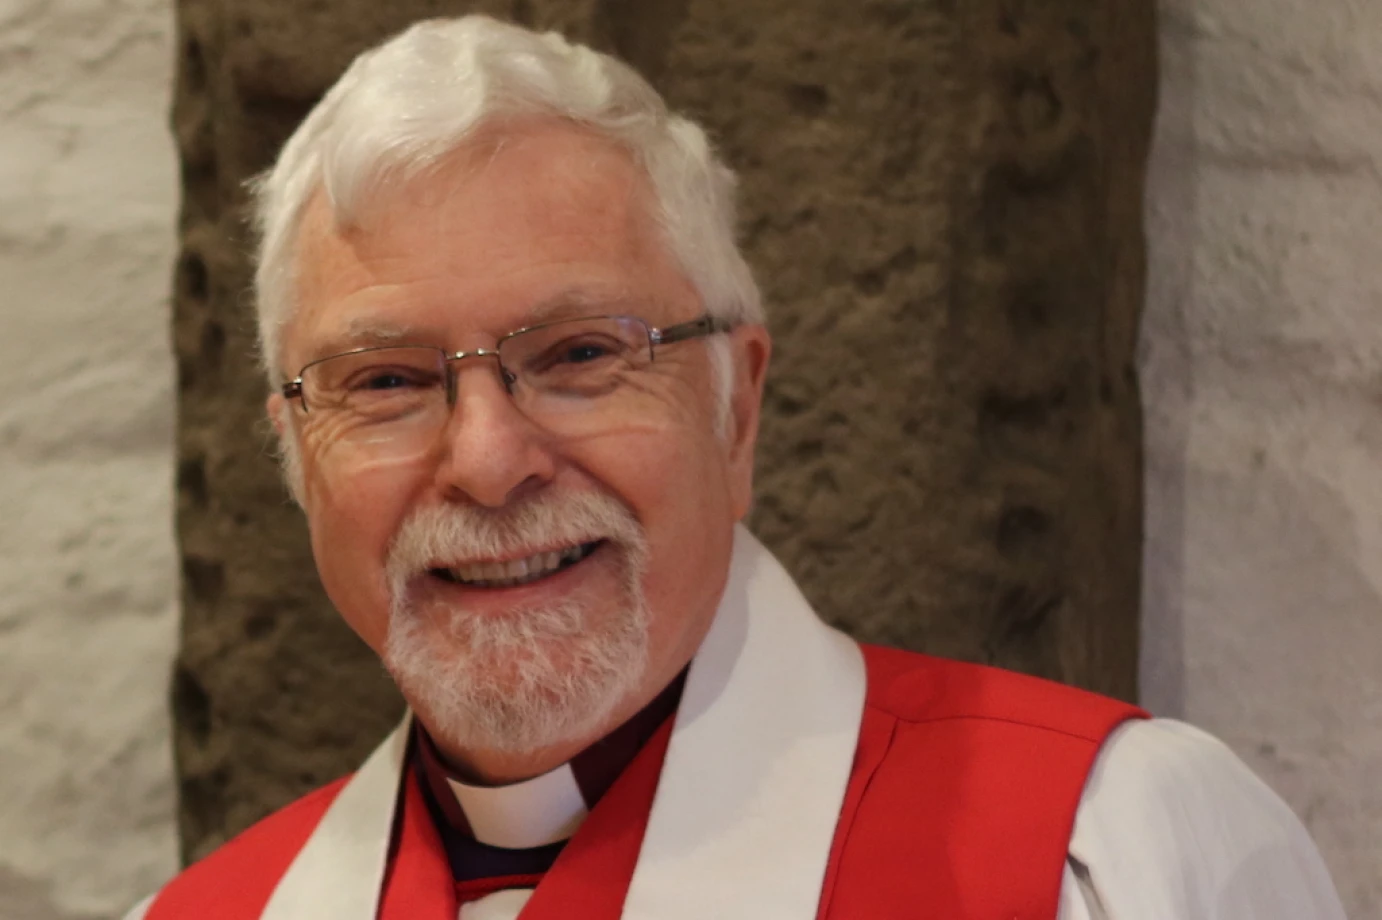 Bishop Harold previews his final words to the diocese